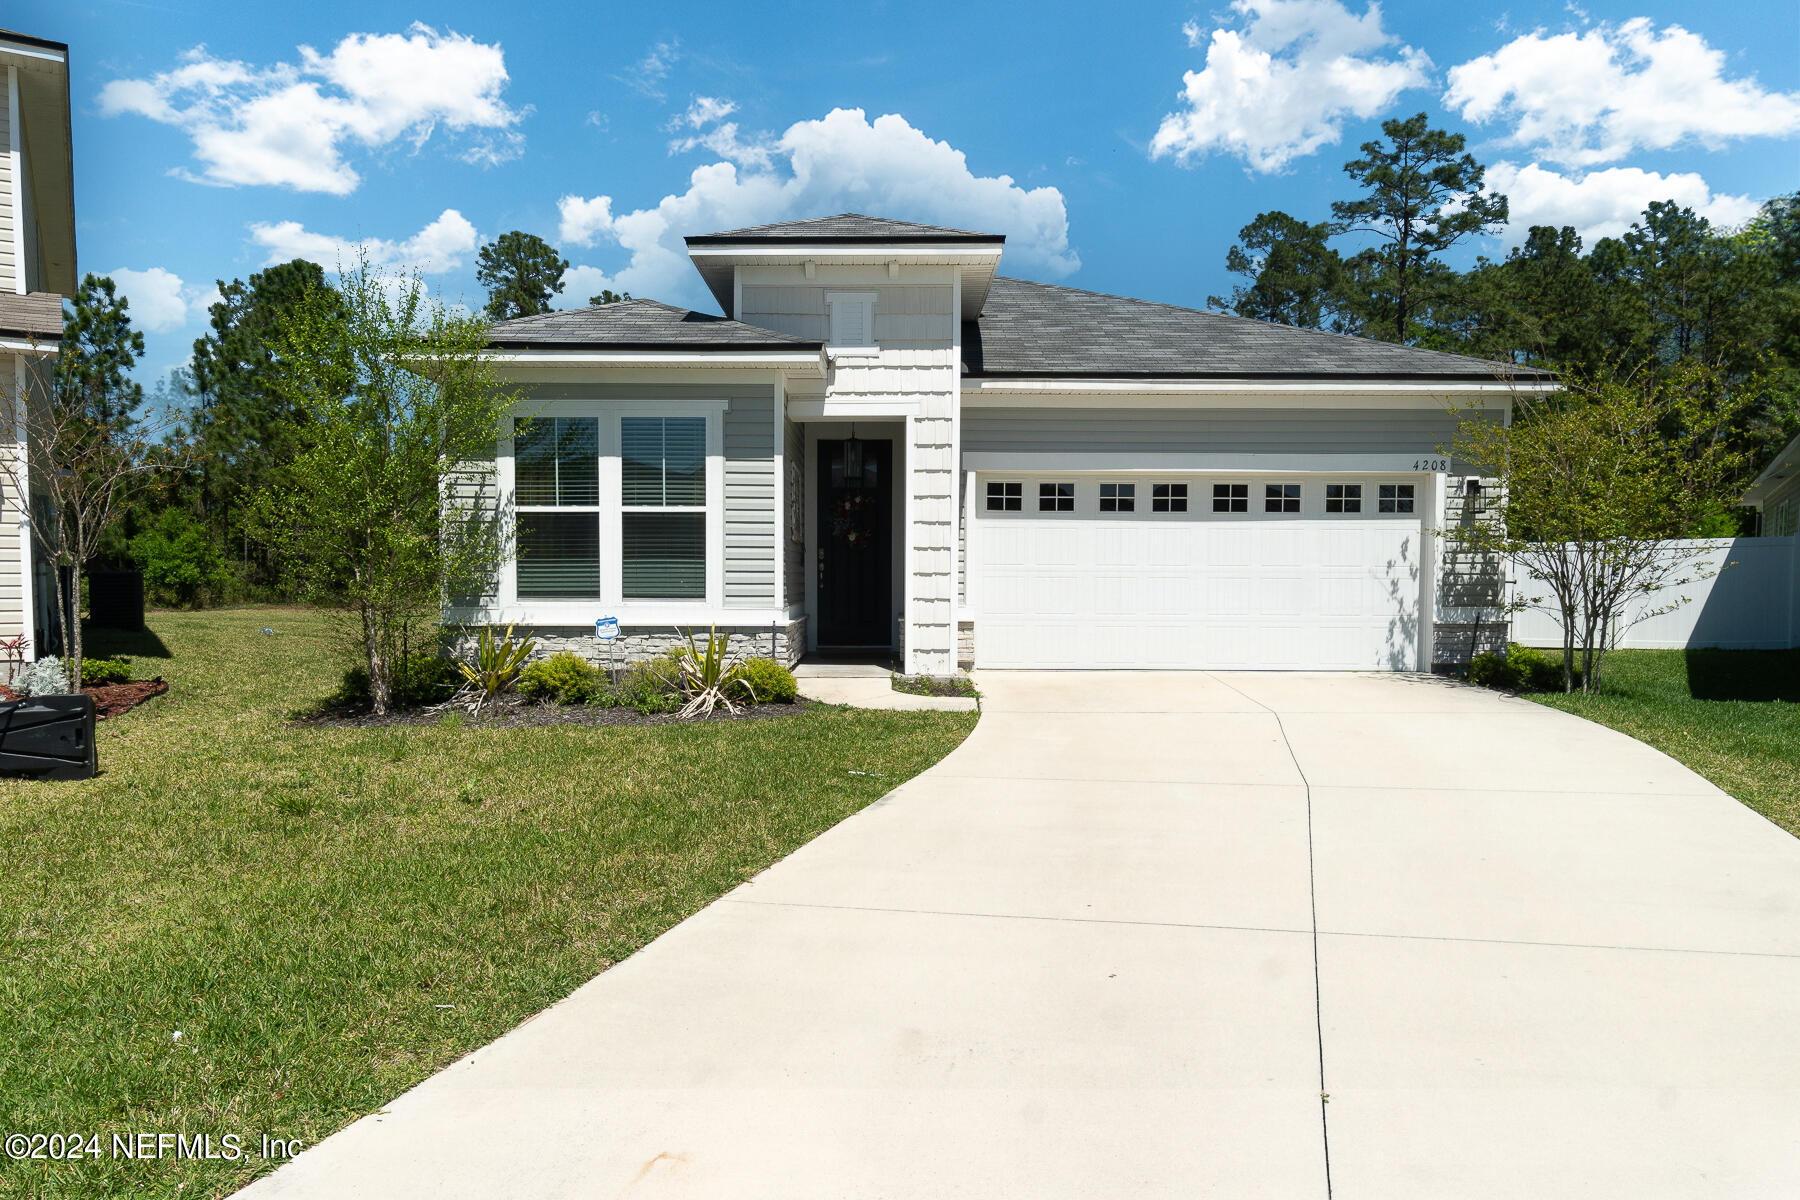 Middleburg, FL home for sale located at 4208 Caribbean Pine Court, Middleburg, FL 32068